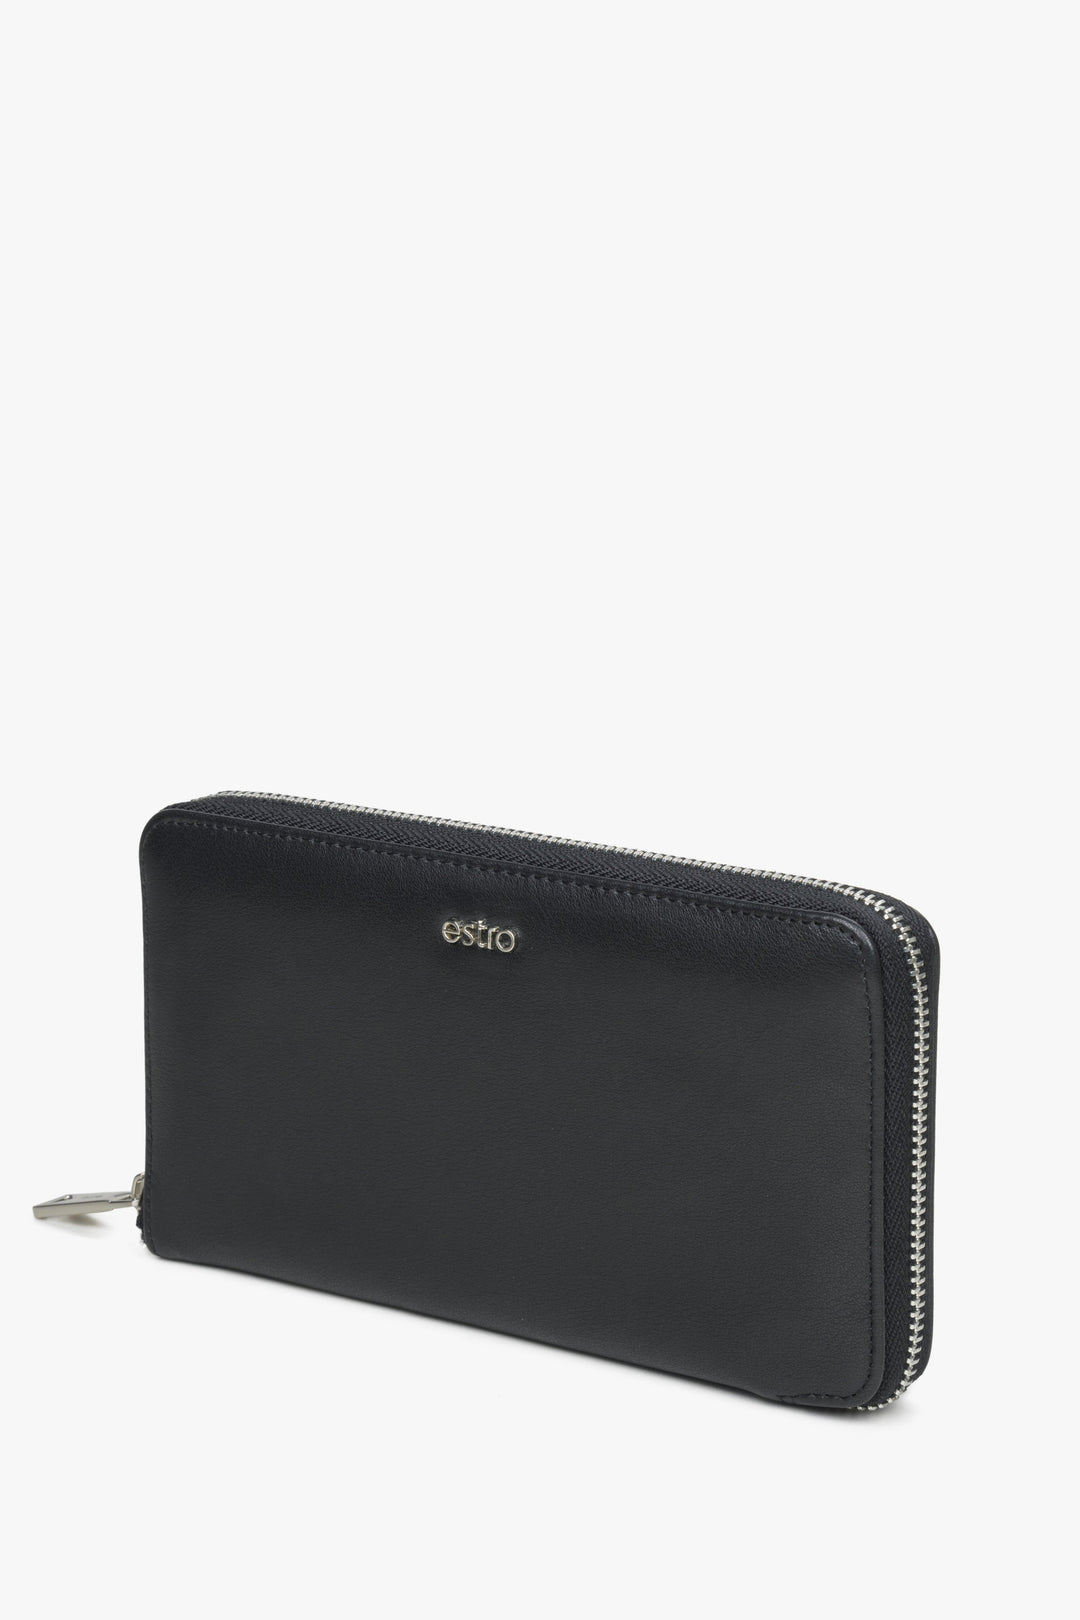 A men's black wallet made of genuine leather with silver hardware.